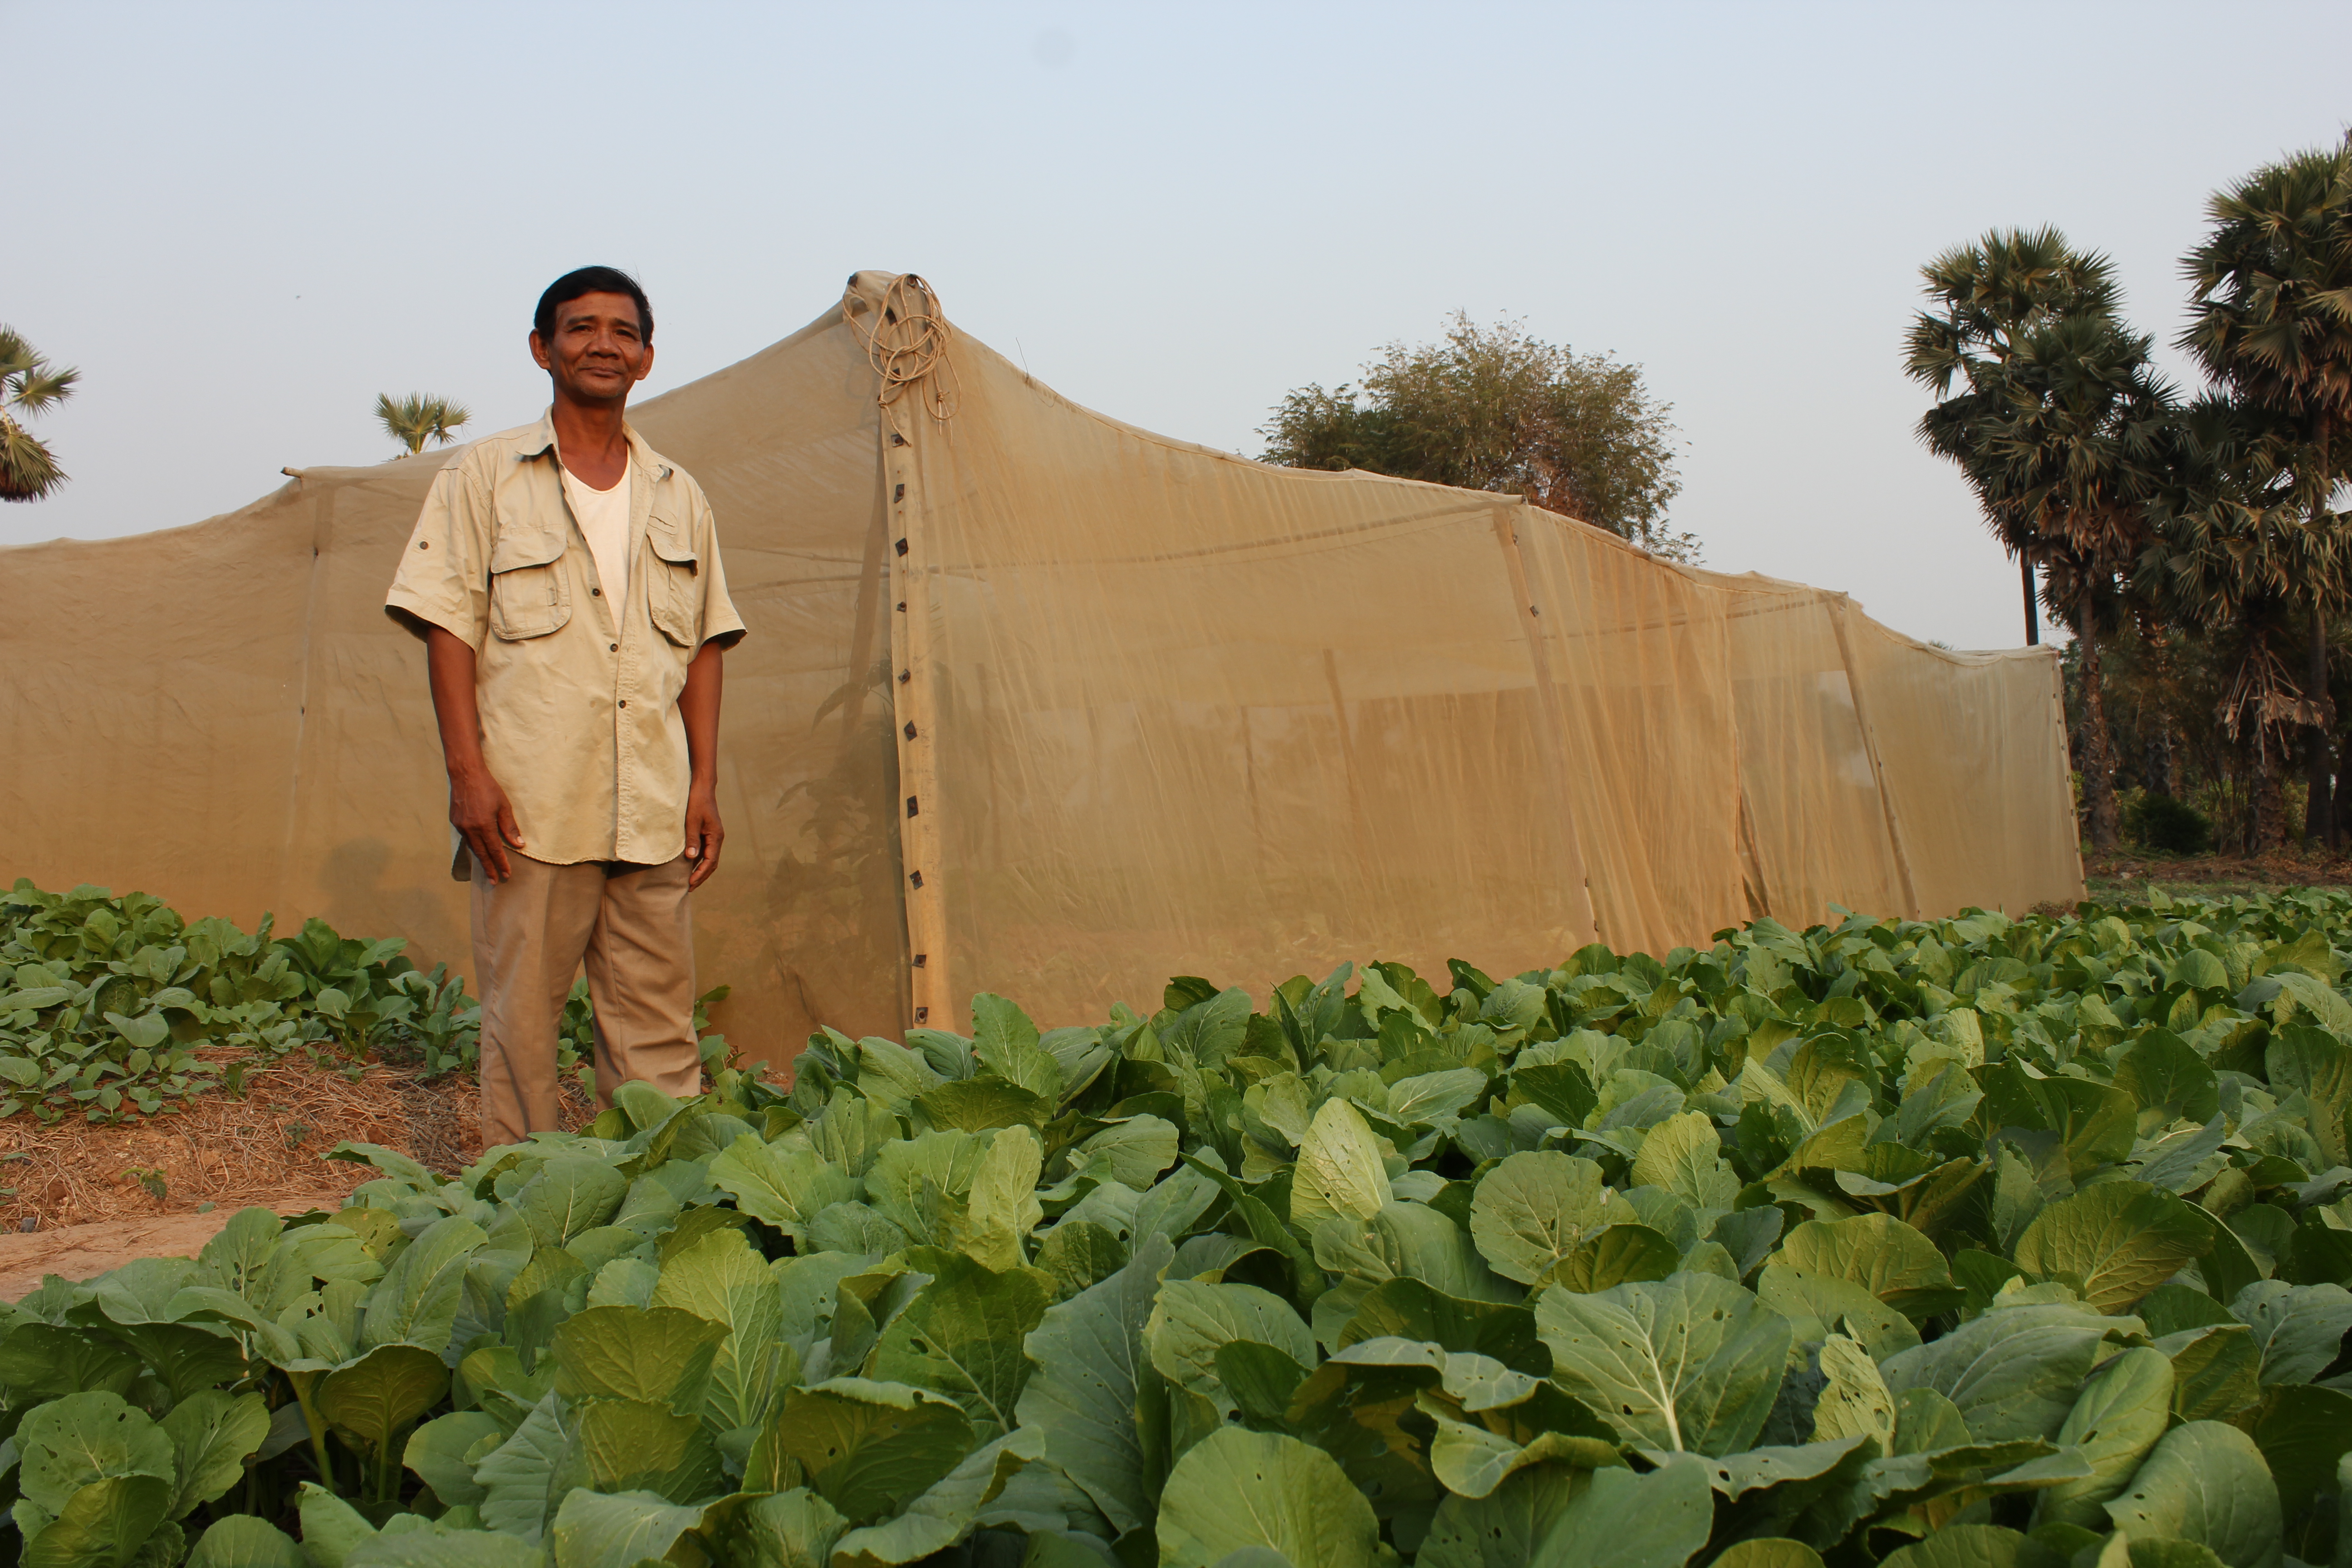 Cambodian man stands in a vegetable field with leafy greens growing, just outside of a nethouse